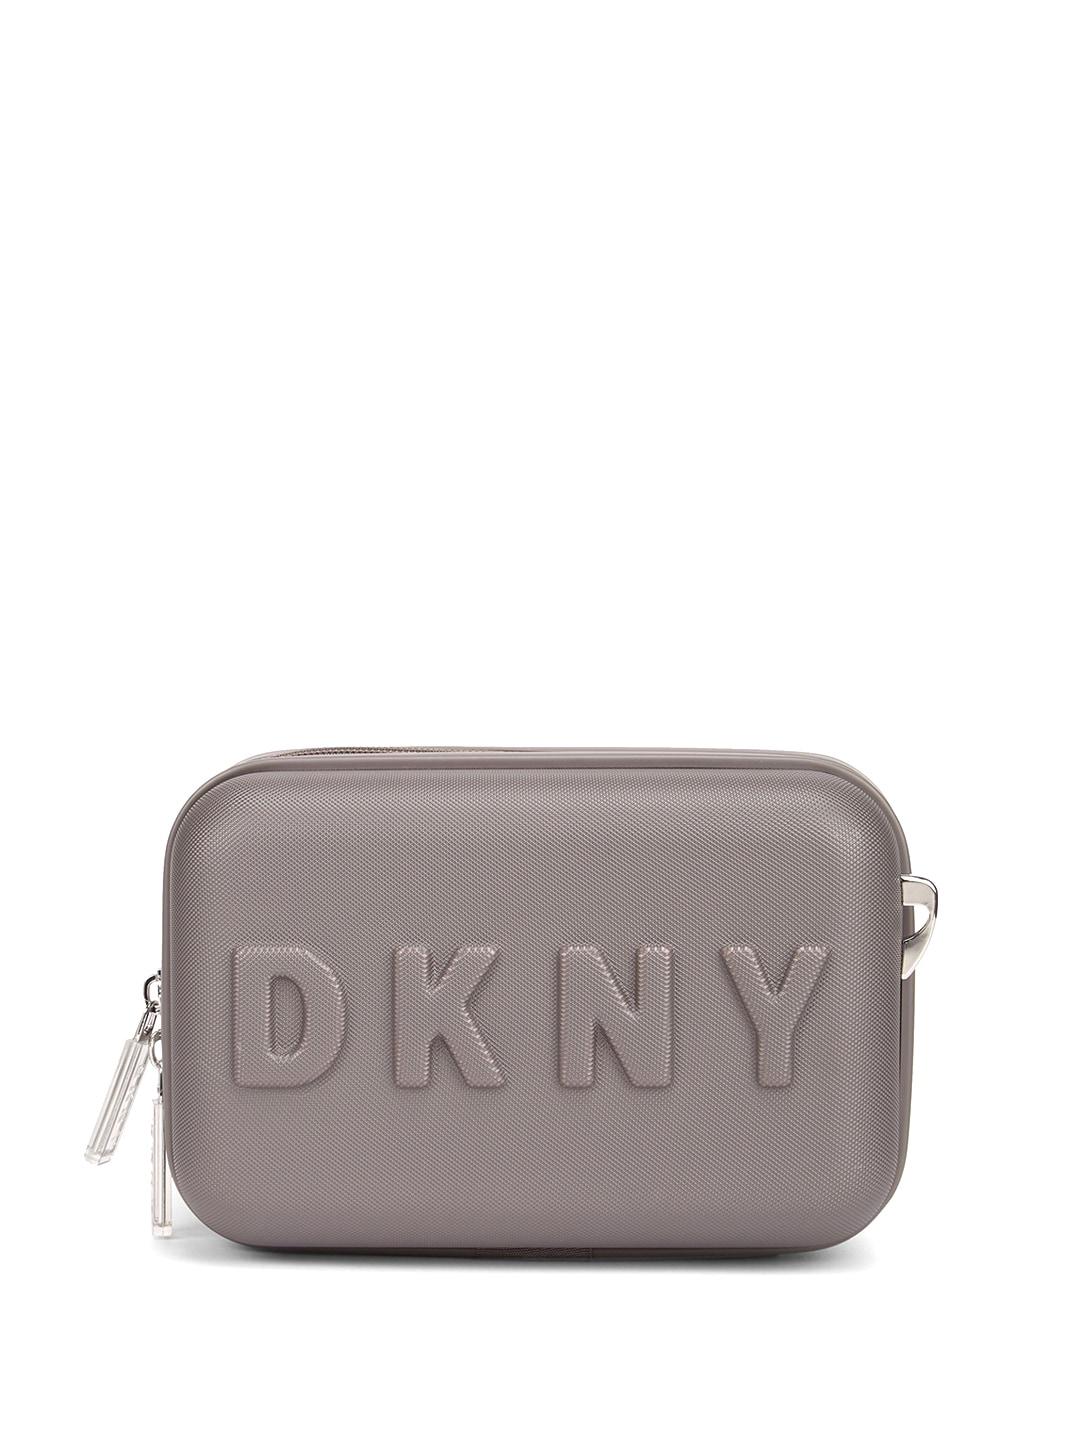 DKNY ABS Hard Beauty Case Makeup Pouch